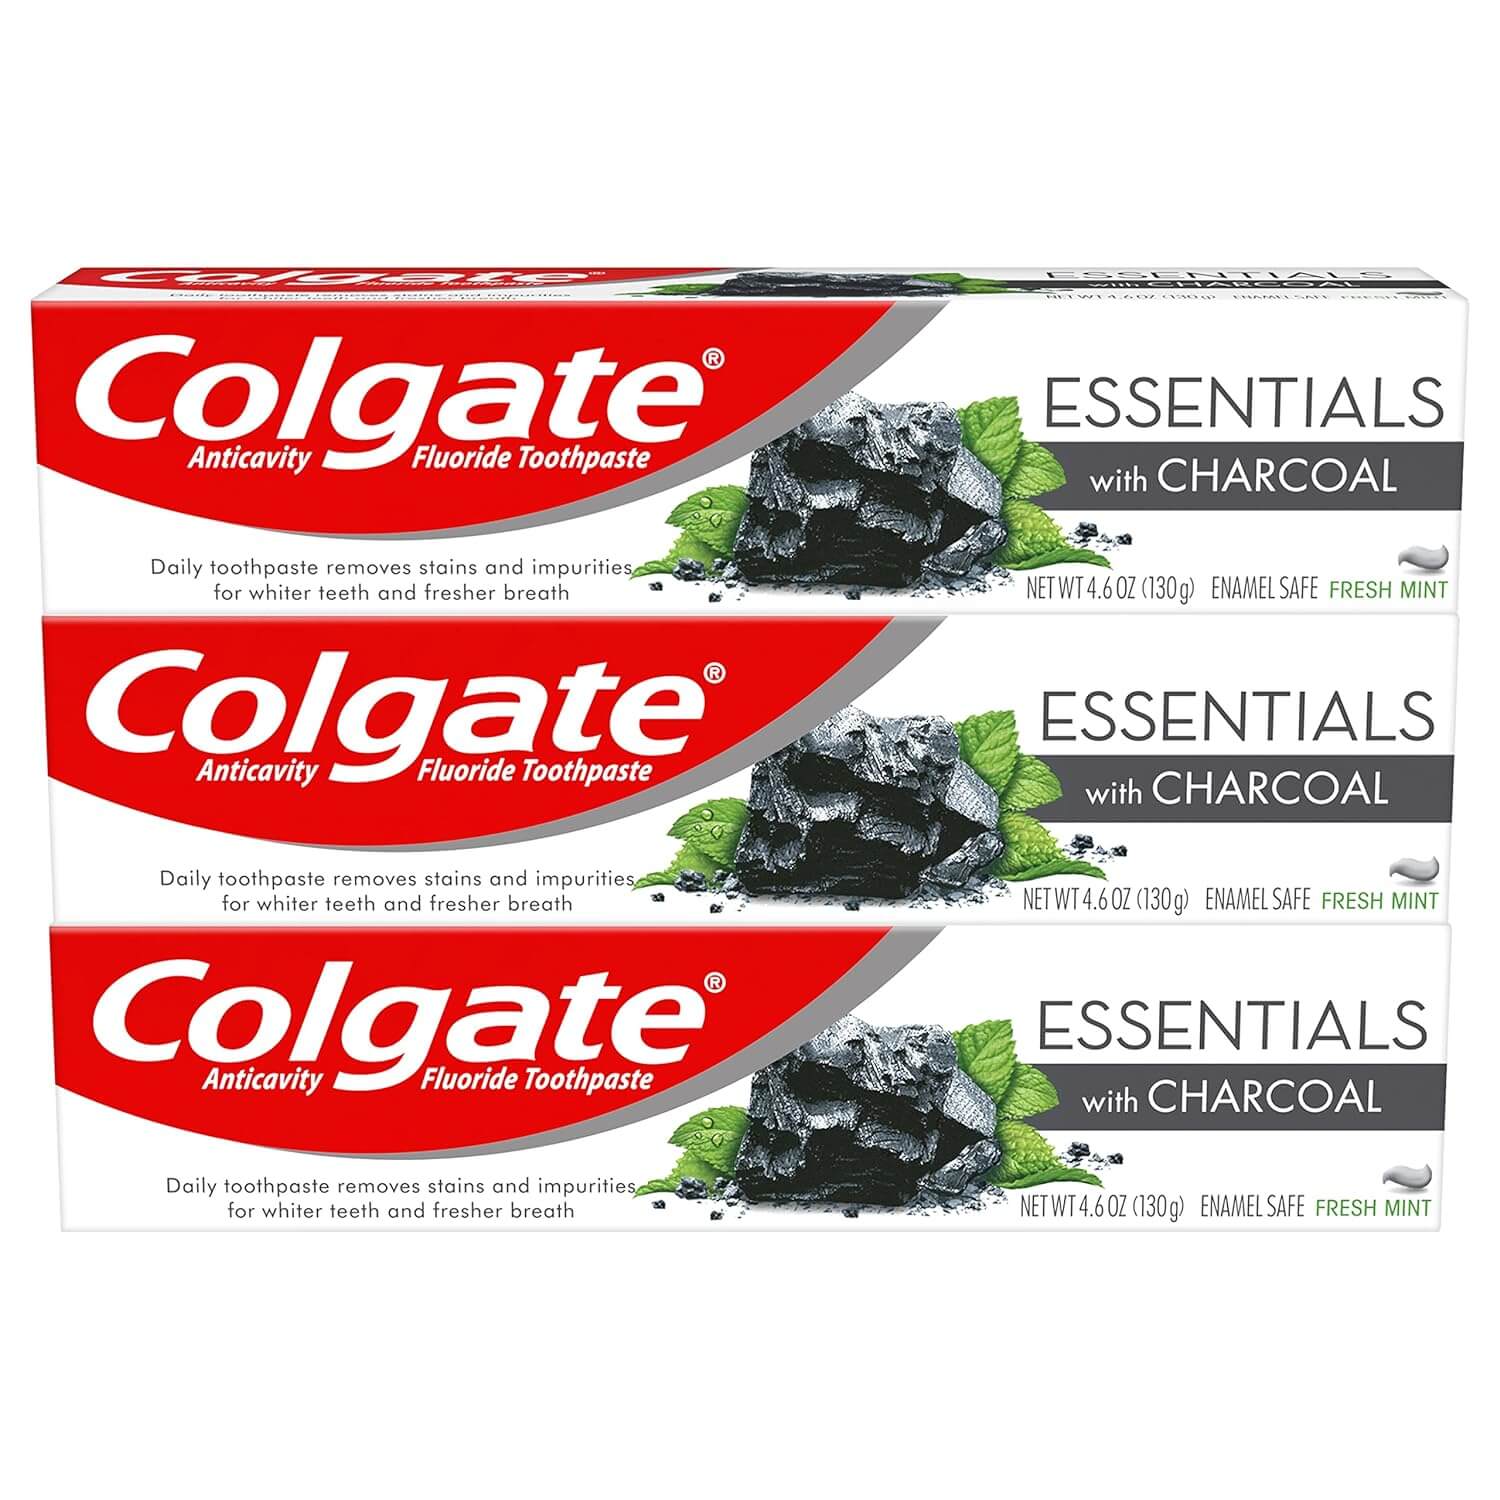 Colgate Essential Charcoal Whitening Toothpaste